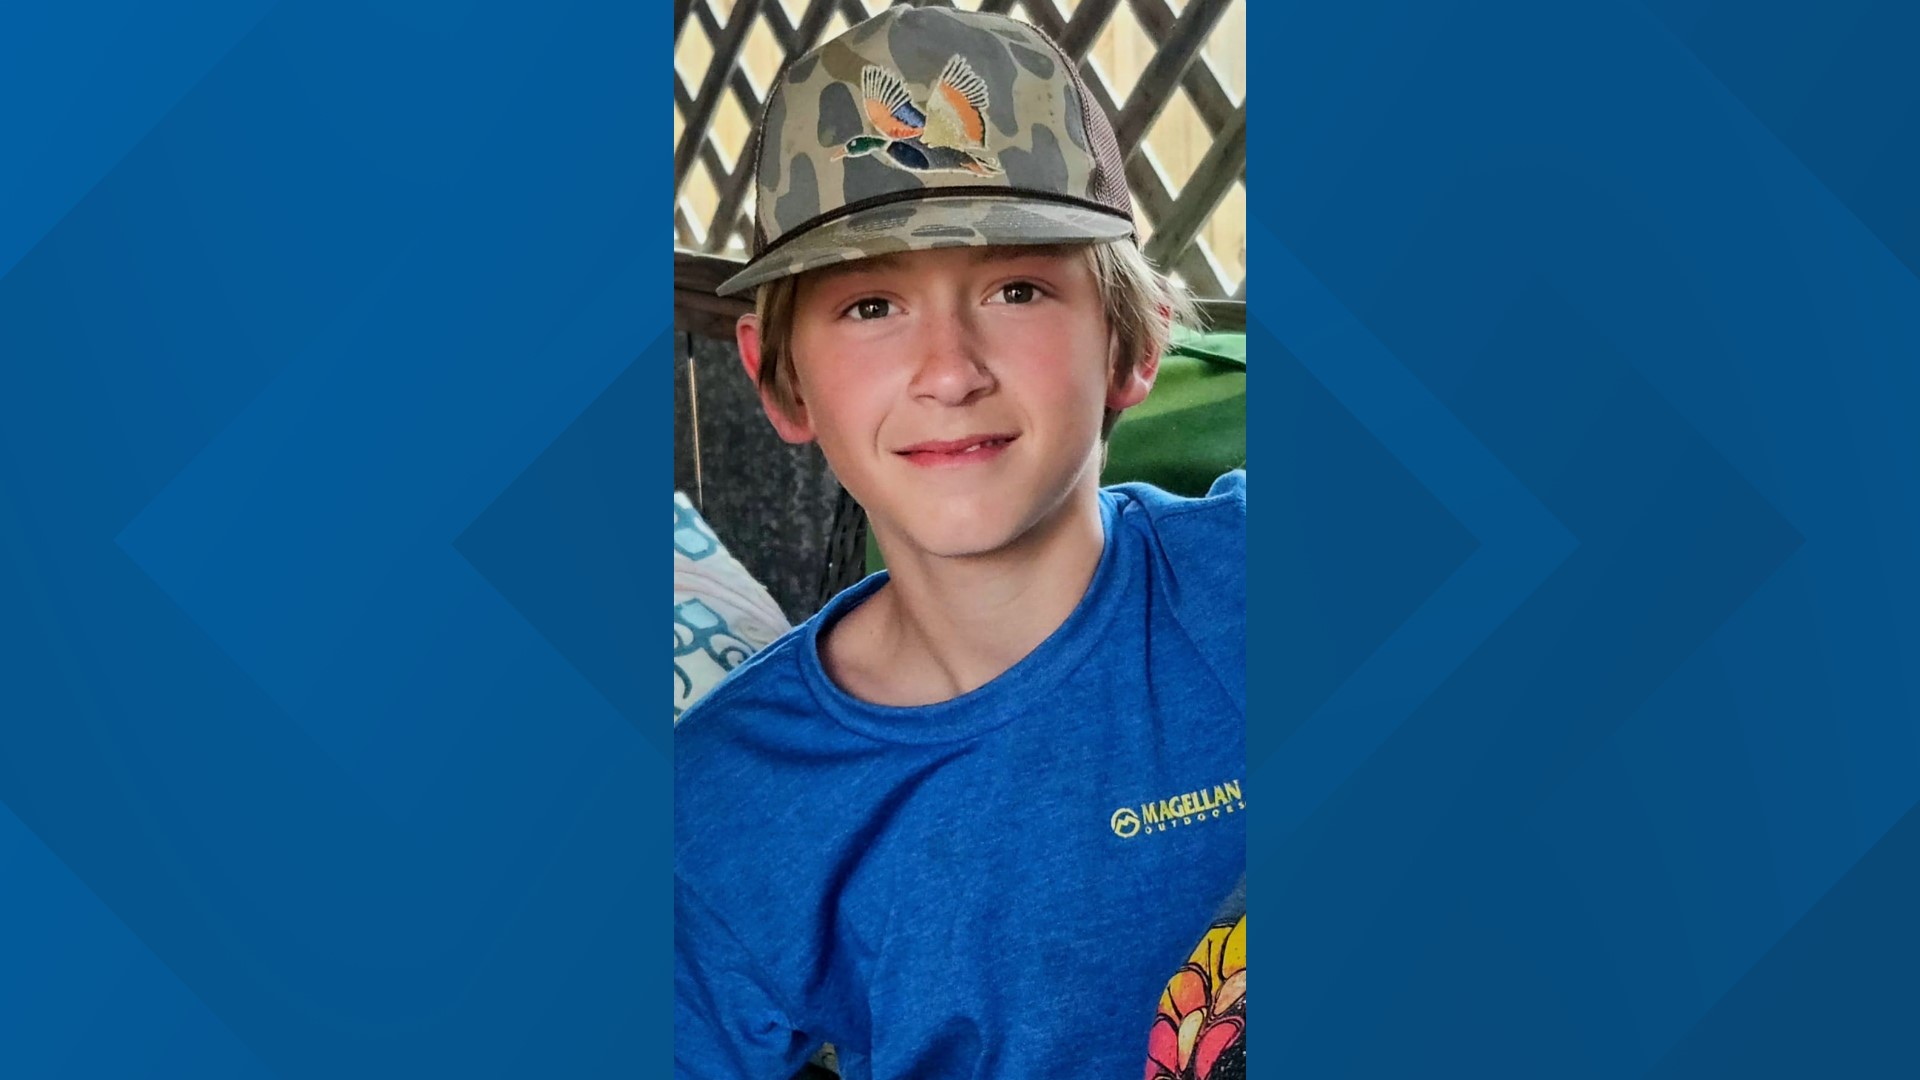 On Tuesday, May 30, 2023 around 6 p.m., a Texas Game Warden Dive Team recovered a body in the Neches River believed to be that of Conner Curtice.